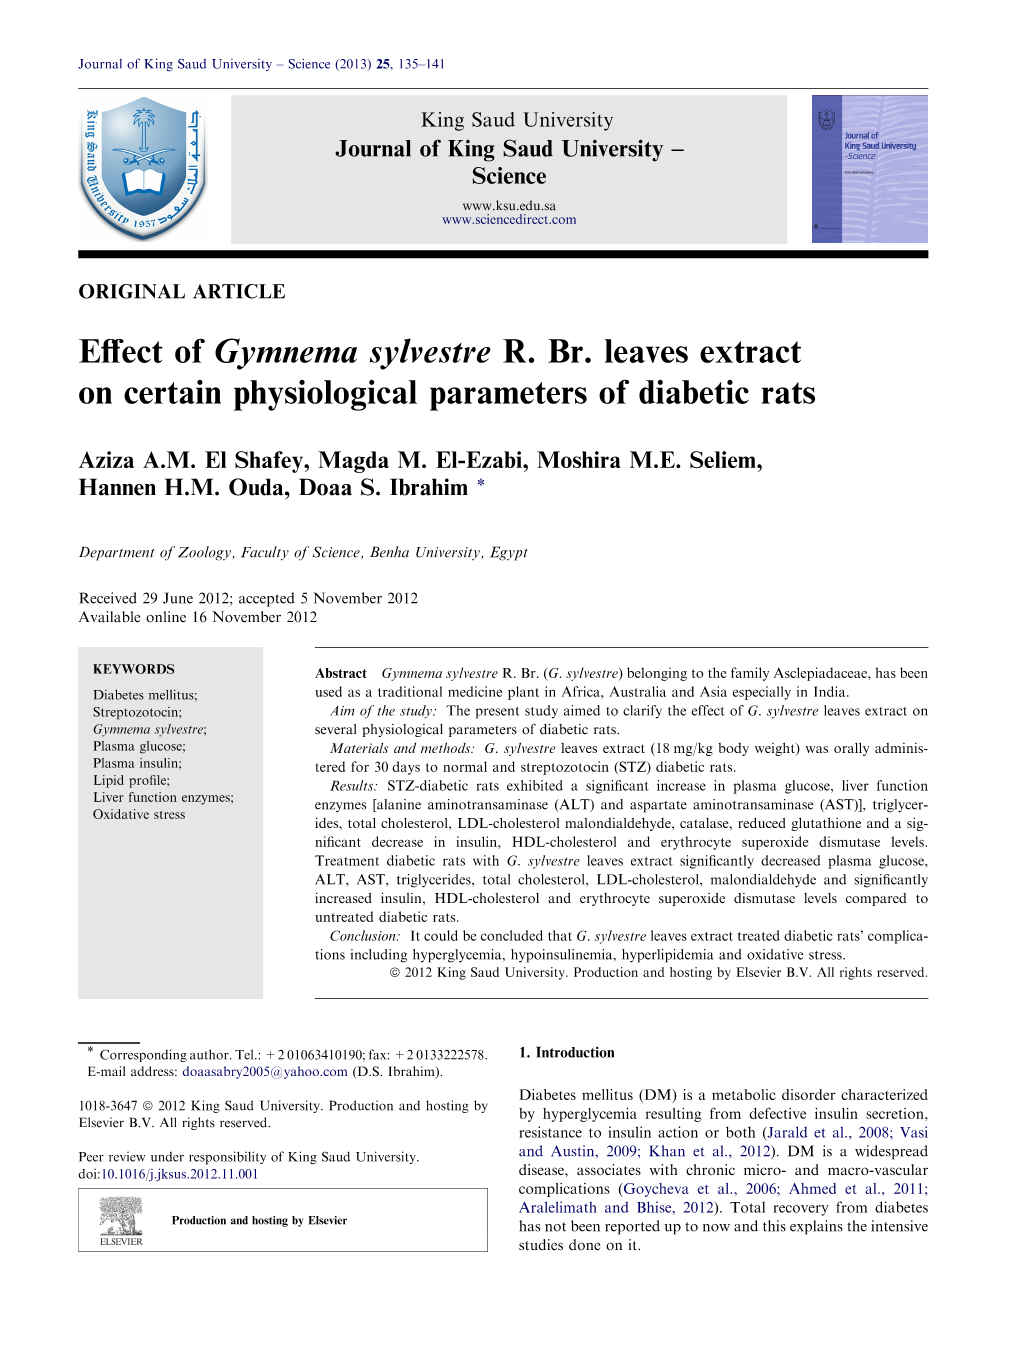 Effect of Gymnema Sylvestre R. Br. Leaves Extract on Certain